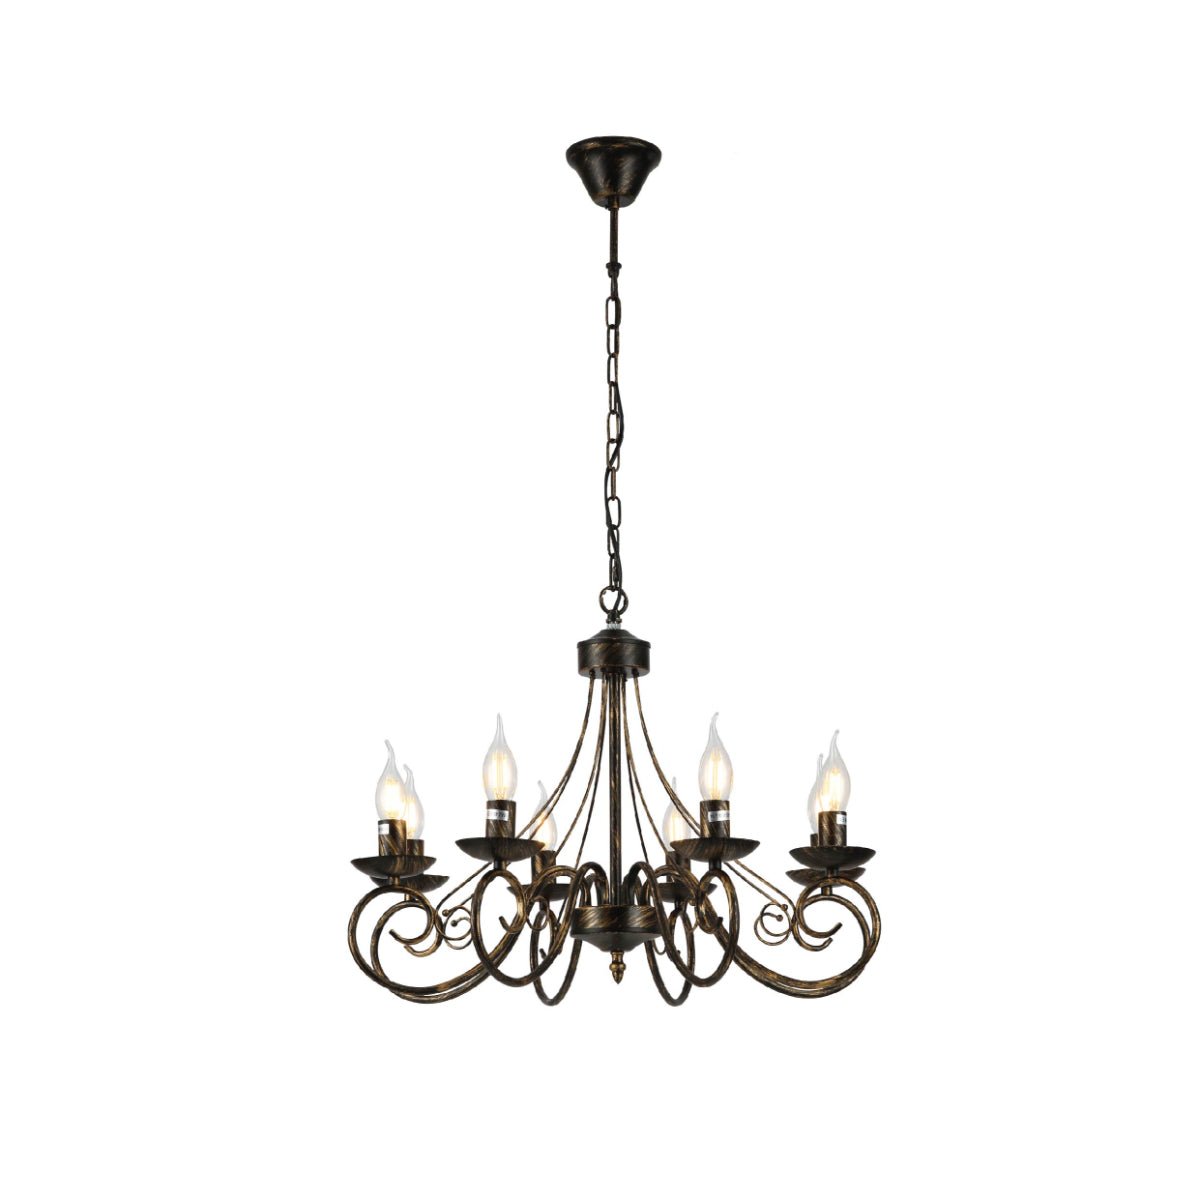 Main image of Candle Vintage Gold Patinated Black French Chandelier Ceiling Light 8xE14 | TEKLED 152-17616